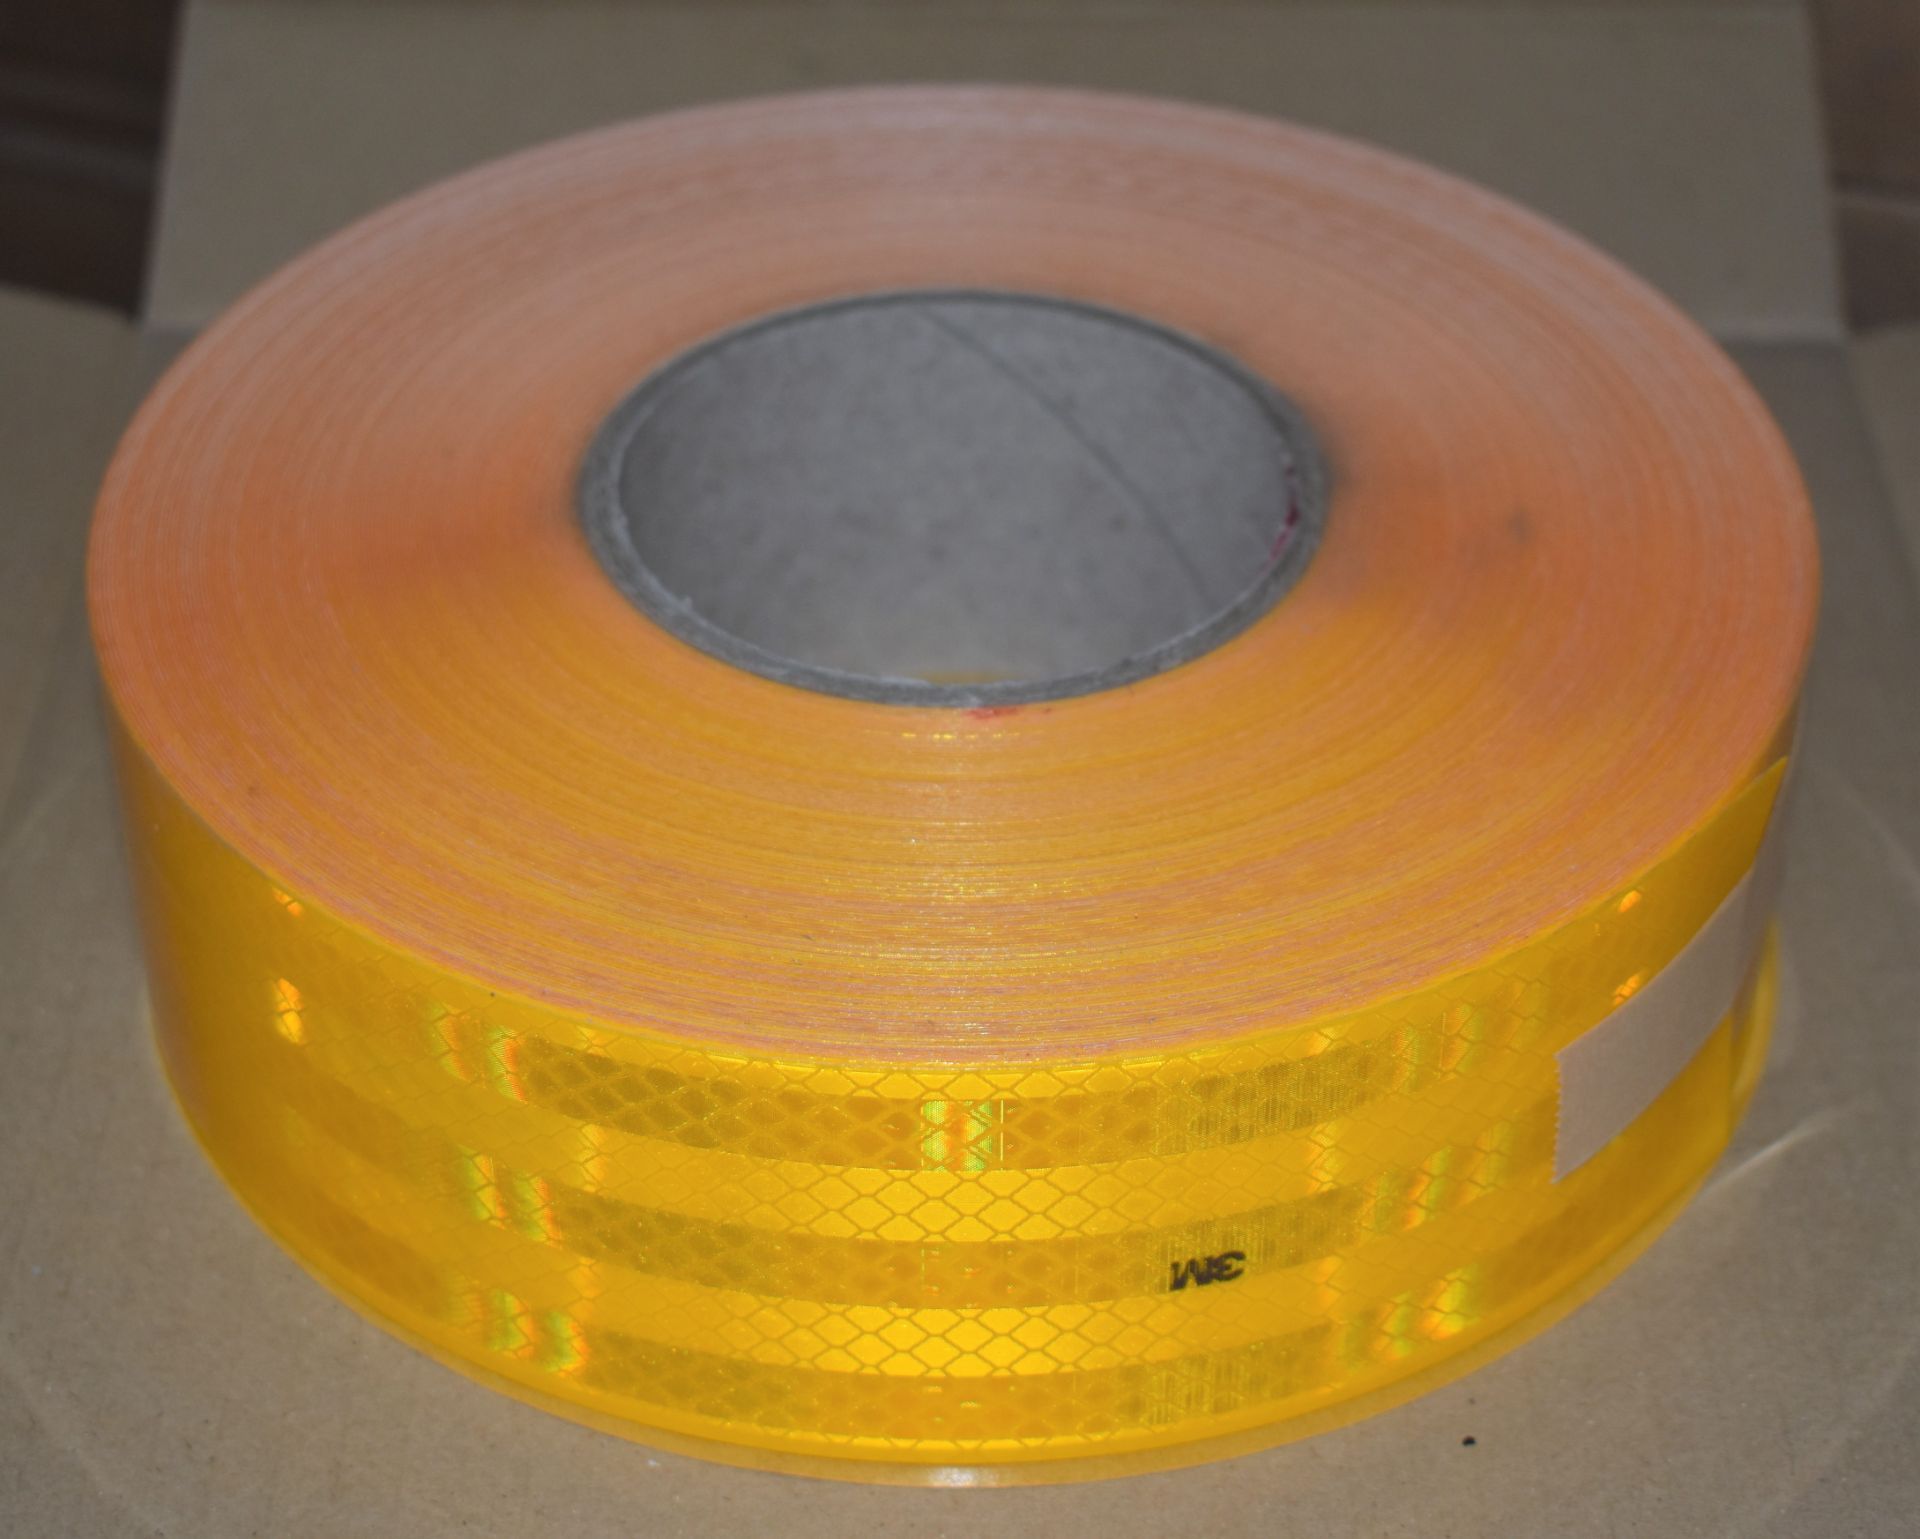 1 x Roll of 3M Conspicuity Tape Reflective Sheeting - Size 55mm x 50m - Diamond Grade - Colour - Image 4 of 4